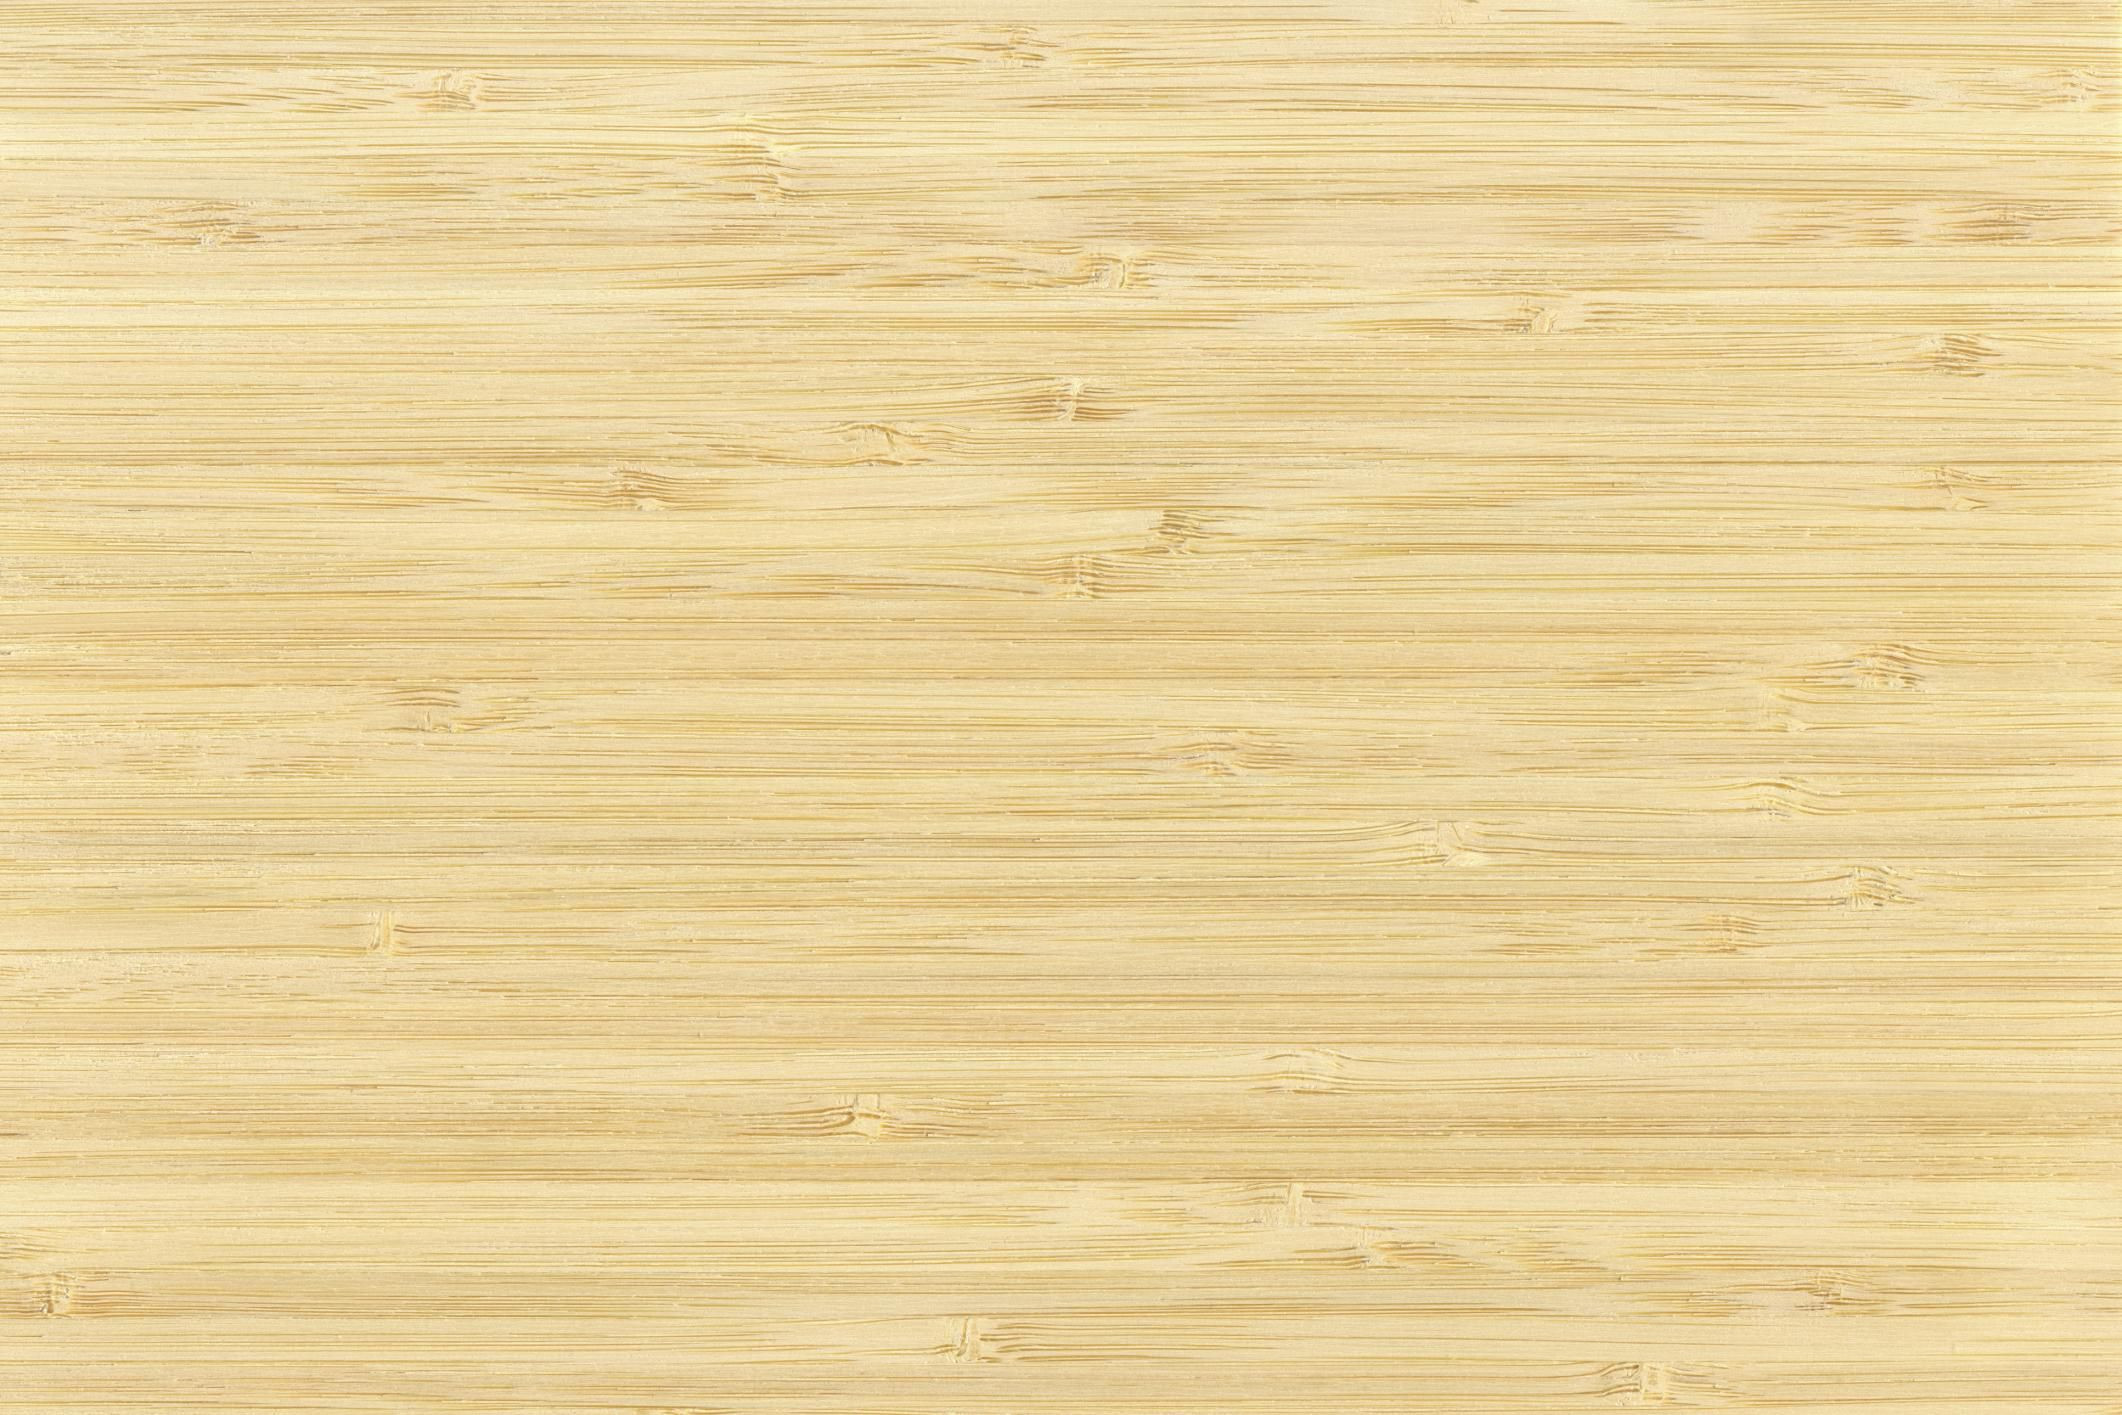 21 Stylish Refinish Hardwood Floors Yourself Video 2024 free download refinish hardwood floors yourself video of bamboo flooring in a bathroom things to consider intended for 182740579 56a2fd883df78cf7727b6d14